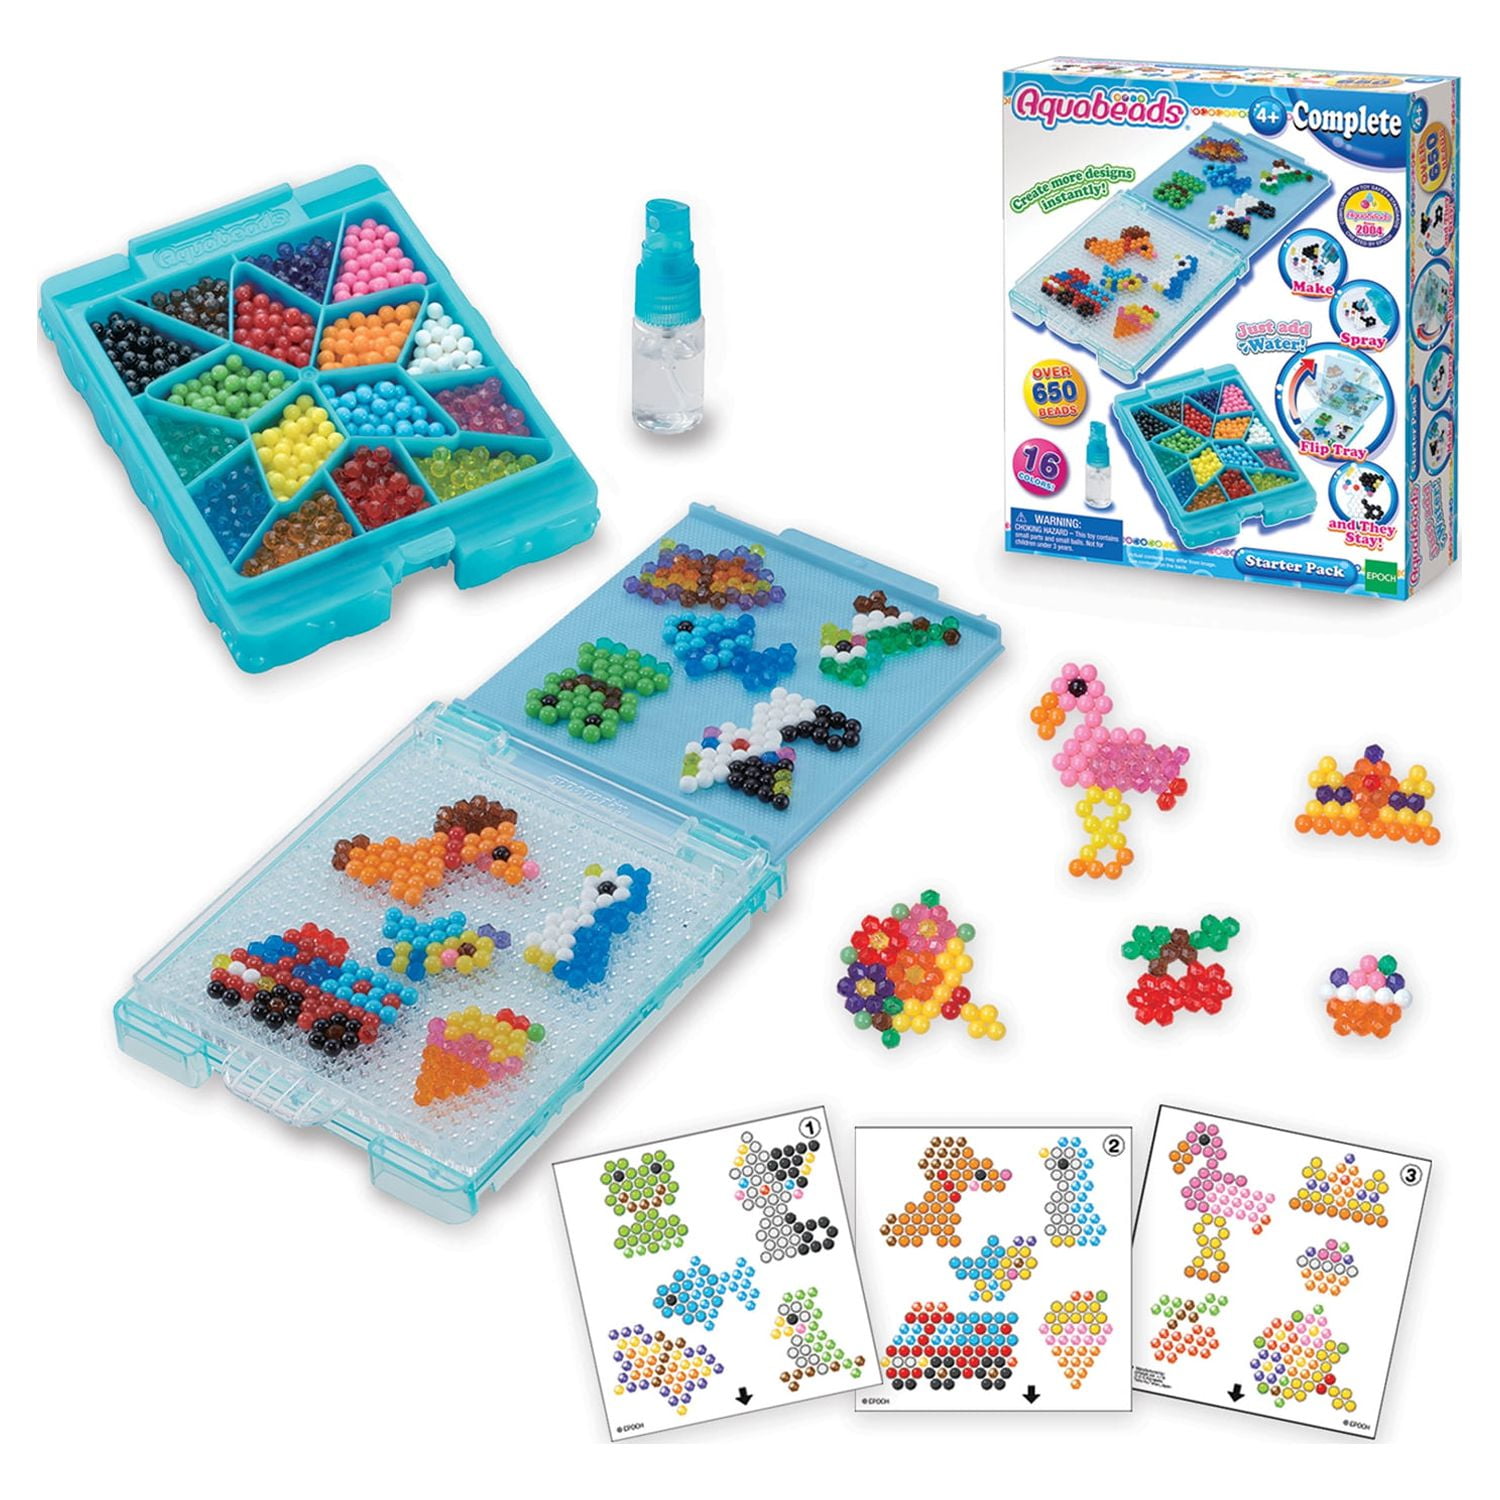 Aquabeads Starter Pack Complete Arts & Crafts Bead Kit for